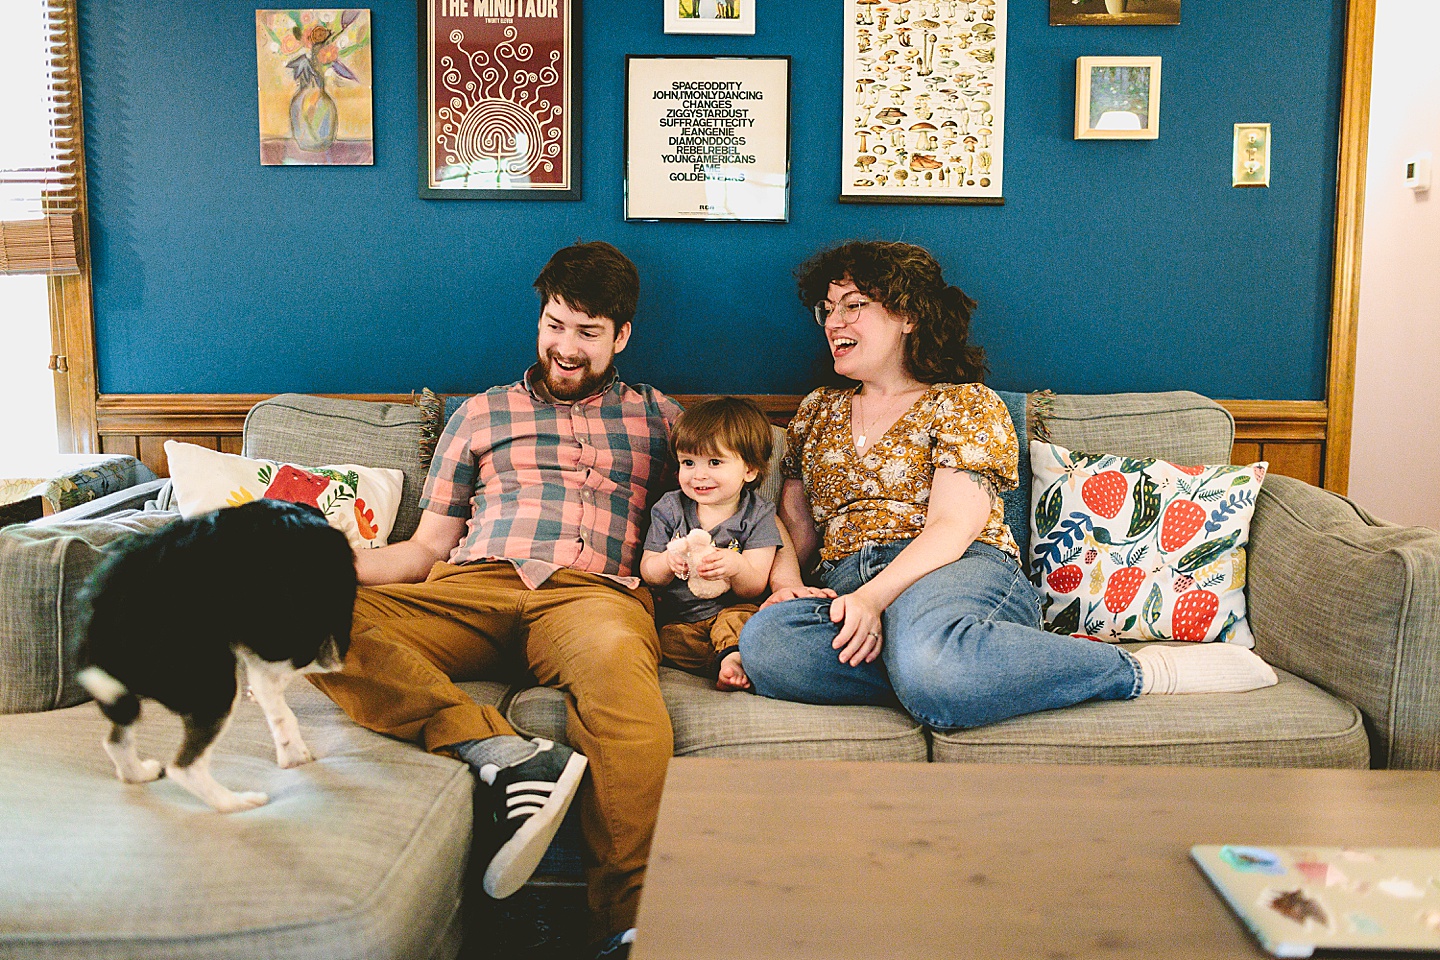 Kid sits on couch with his parents